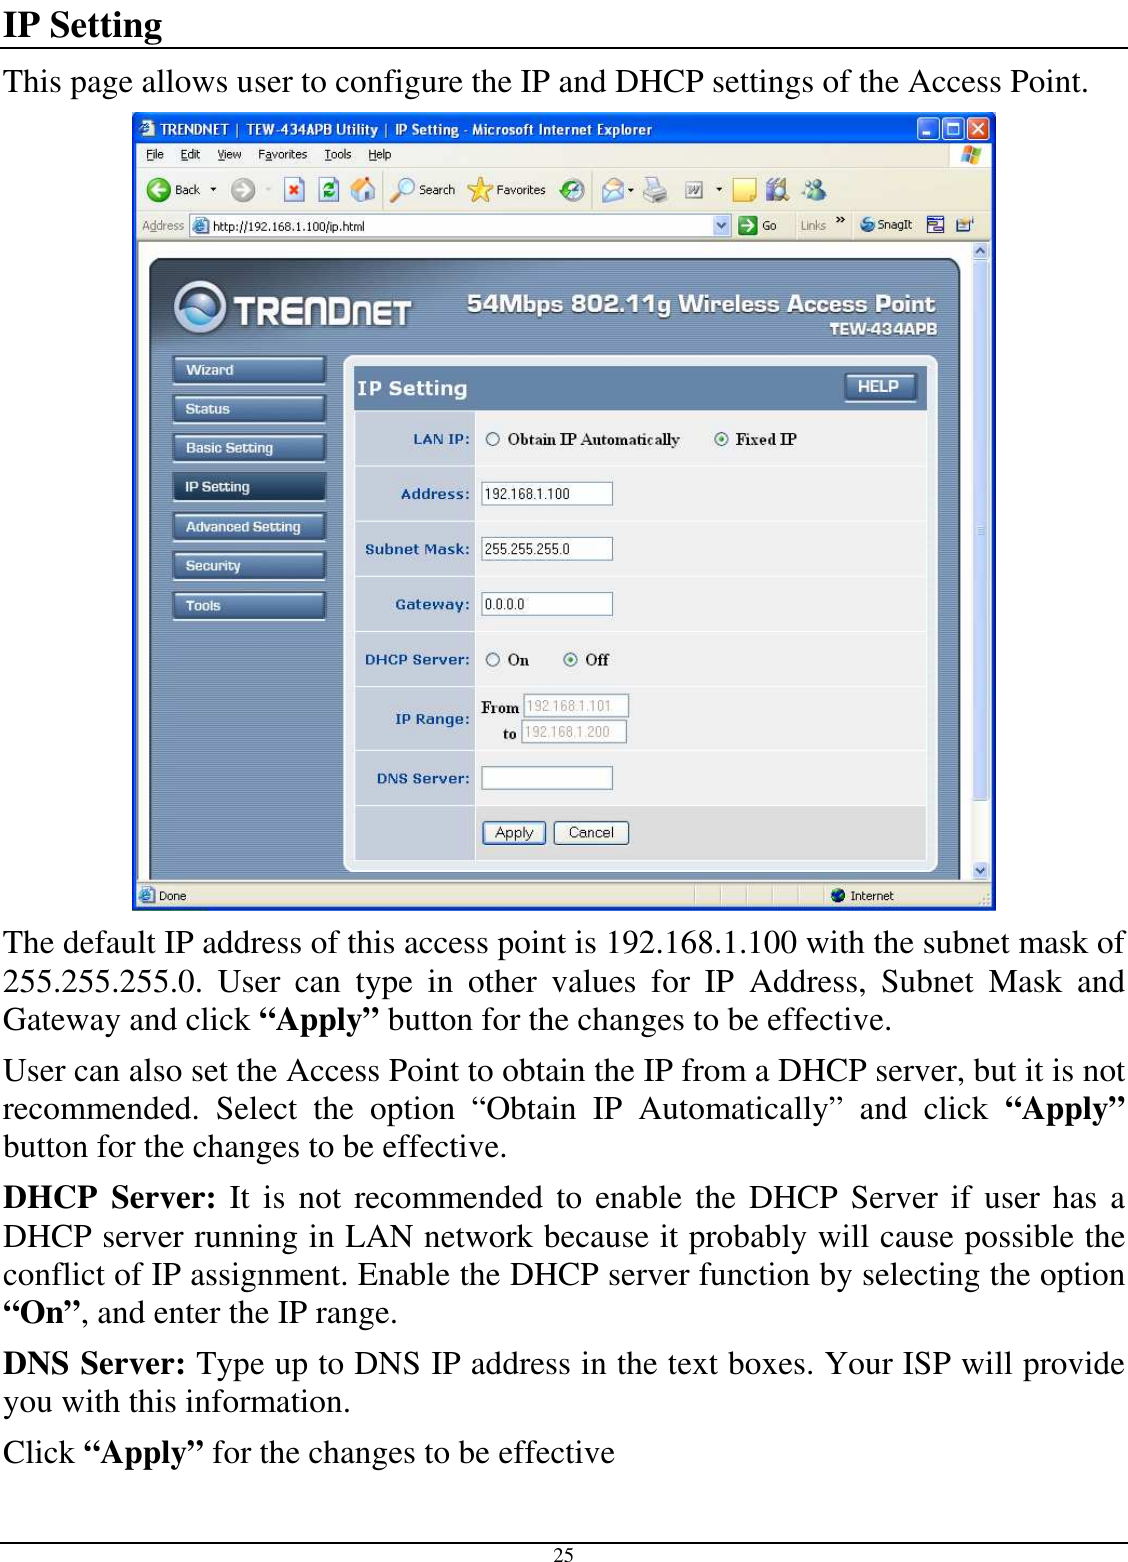  25 IP Setting This page allows user to configure the IP and DHCP settings of the Access Point.  The default IP address of this access point is 192.168.1.100 with the subnet mask of 255.255.255.0.  User  can  type  in  other  values  for  IP  Address,  Subnet  Mask  and Gateway and click “Apply” button for the changes to be effective.  User can also set the Access Point to obtain the IP from a DHCP server, but it is not recommended.  Select  the  option  “Obtain  IP  Automatically”  and  click  “Apply” button for the changes to be effective. DHCP  Server: It is  not recommended  to enable the DHCP  Server if user has  a DHCP server running in LAN network because it probably will cause possible the conflict of IP assignment. Enable the DHCP server function by selecting the option “On”, and enter the IP range. DNS Server: Type up to DNS IP address in the text boxes. Your ISP will provide you with this information. Click “Apply” for the changes to be effective 